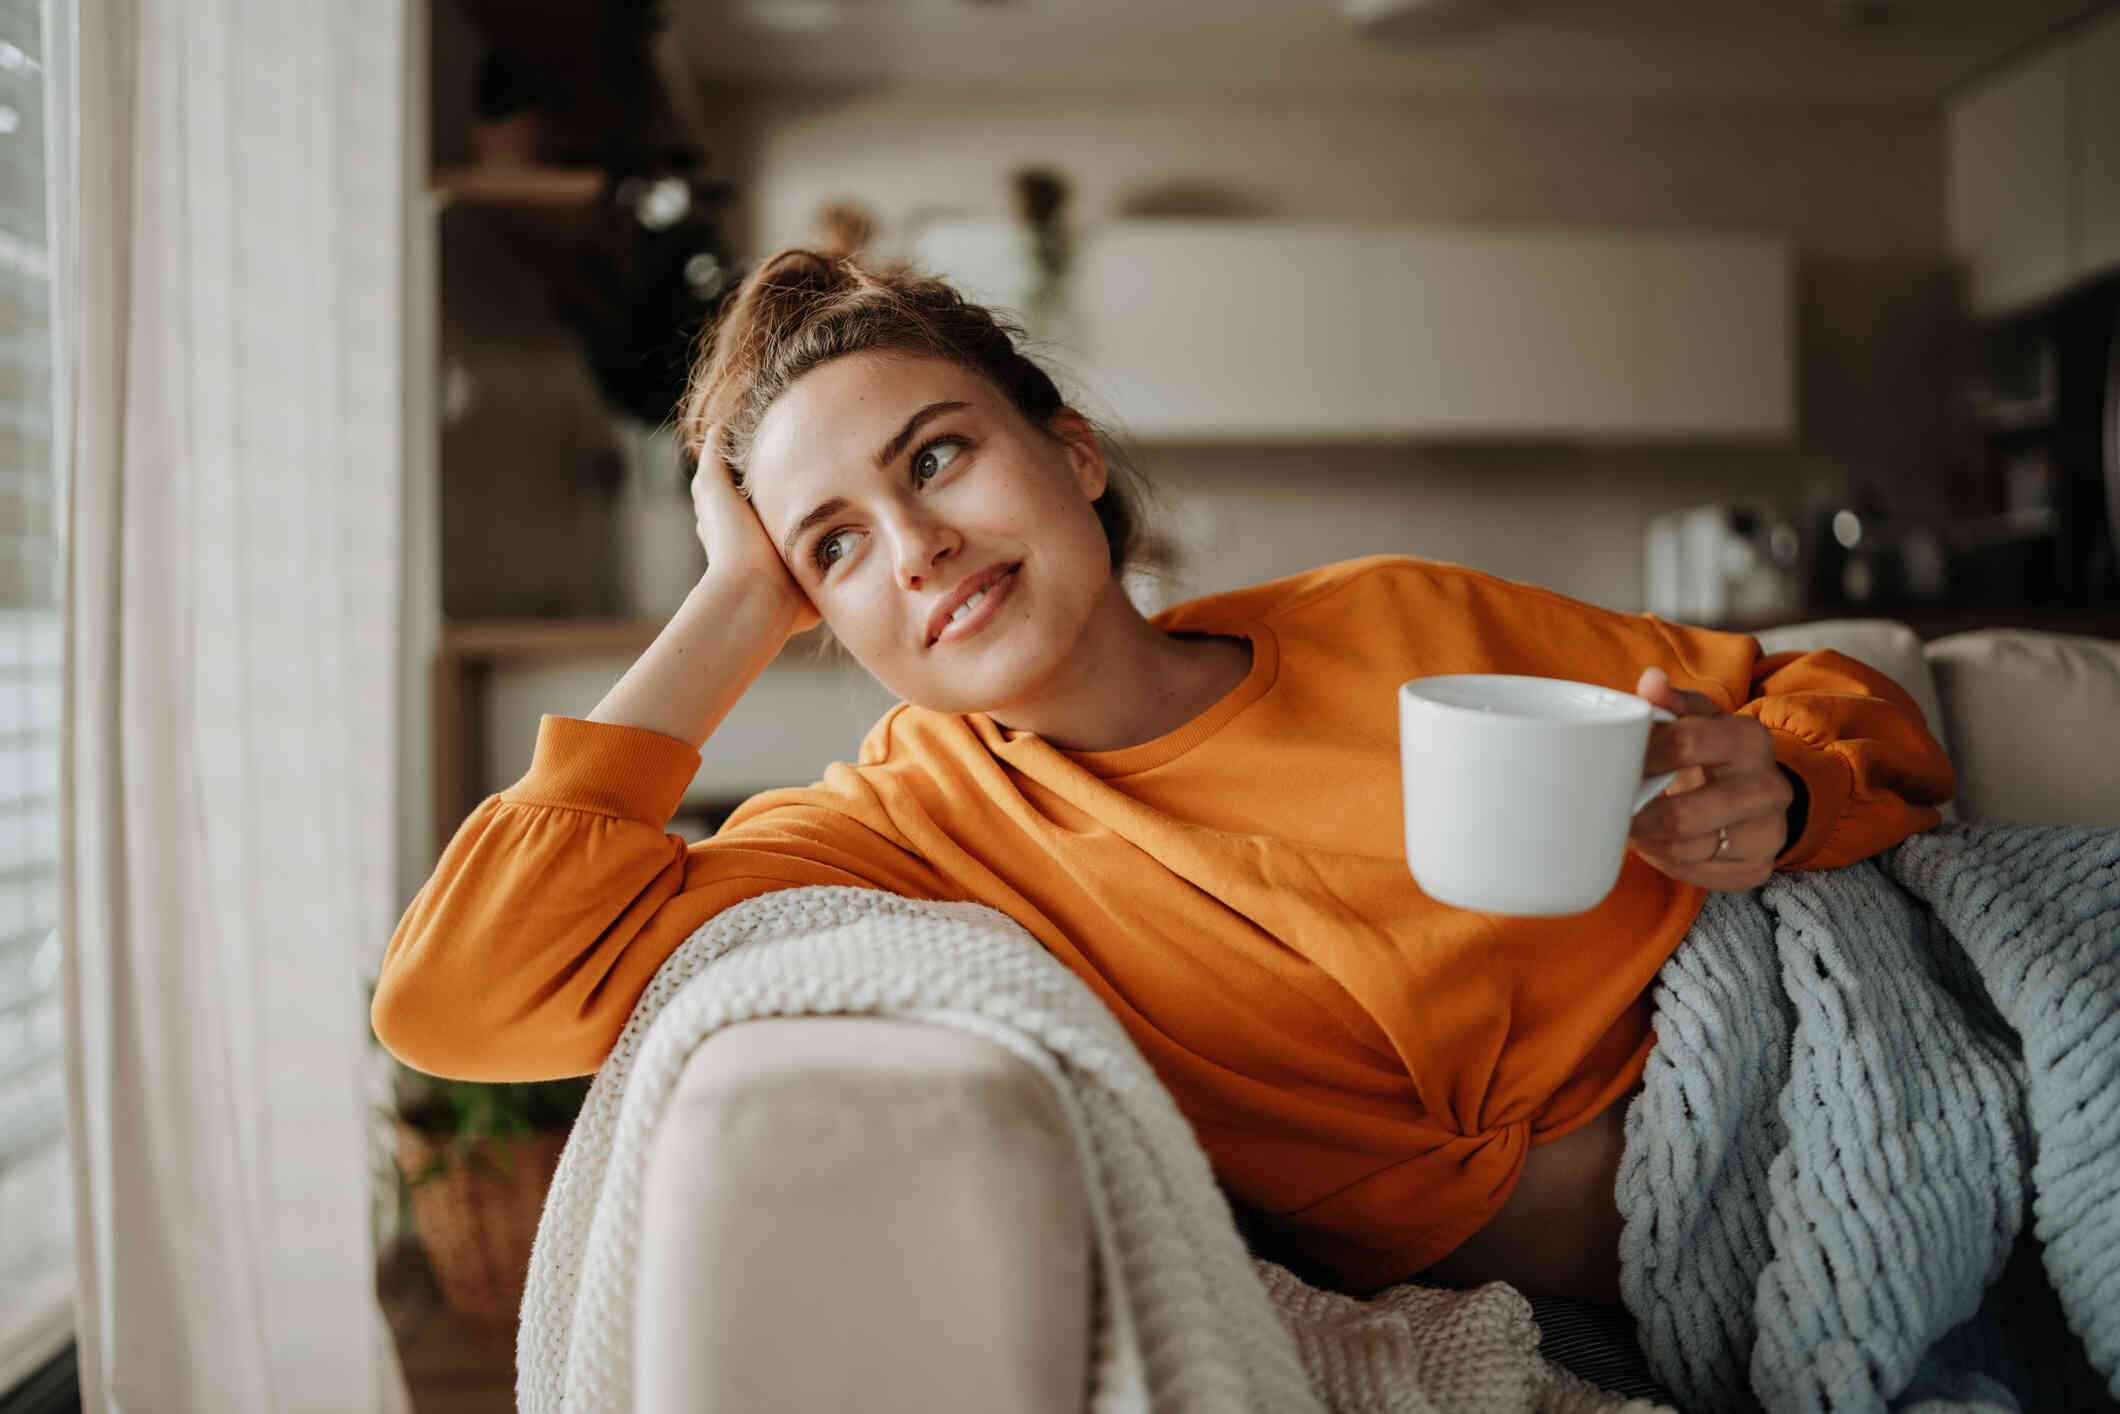 A woman in an orange shirt reclines on the couch with a cup of coffee while smiling and gazing out of the window.